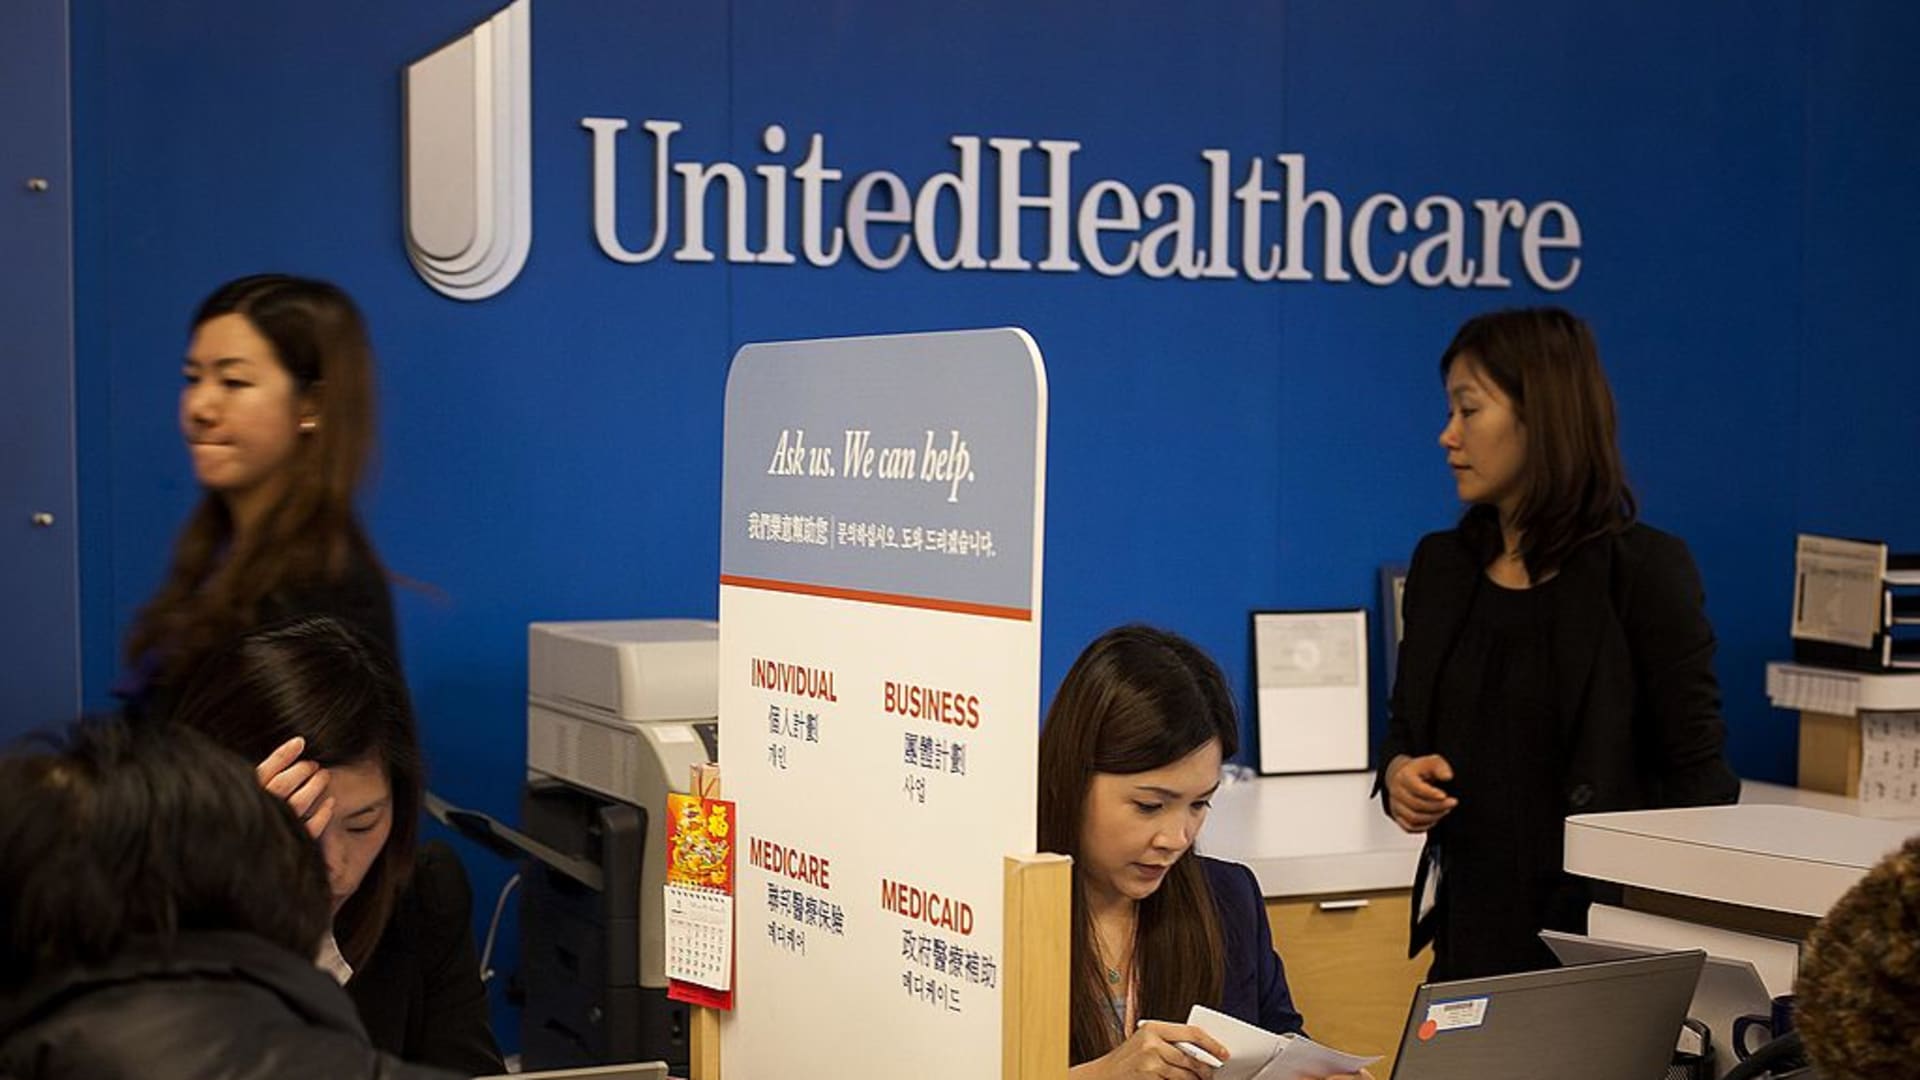 Health insurance stocks slide after UnitedHealth warns more surgeries will drive up medical costs